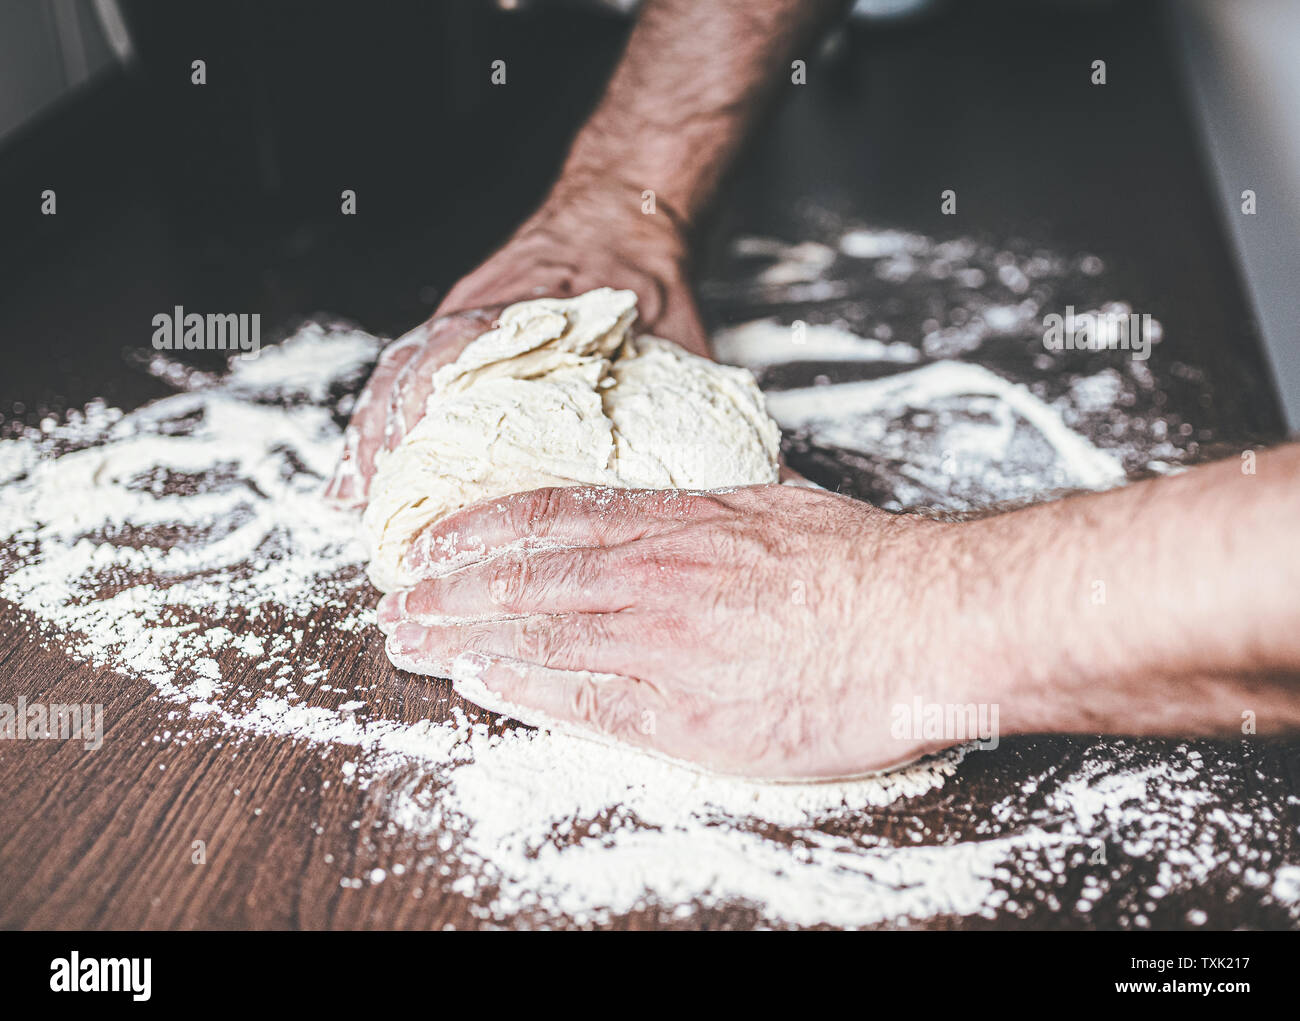 close-up of hands of man kneading yeast dough on floured kitchen counter Stock Photo